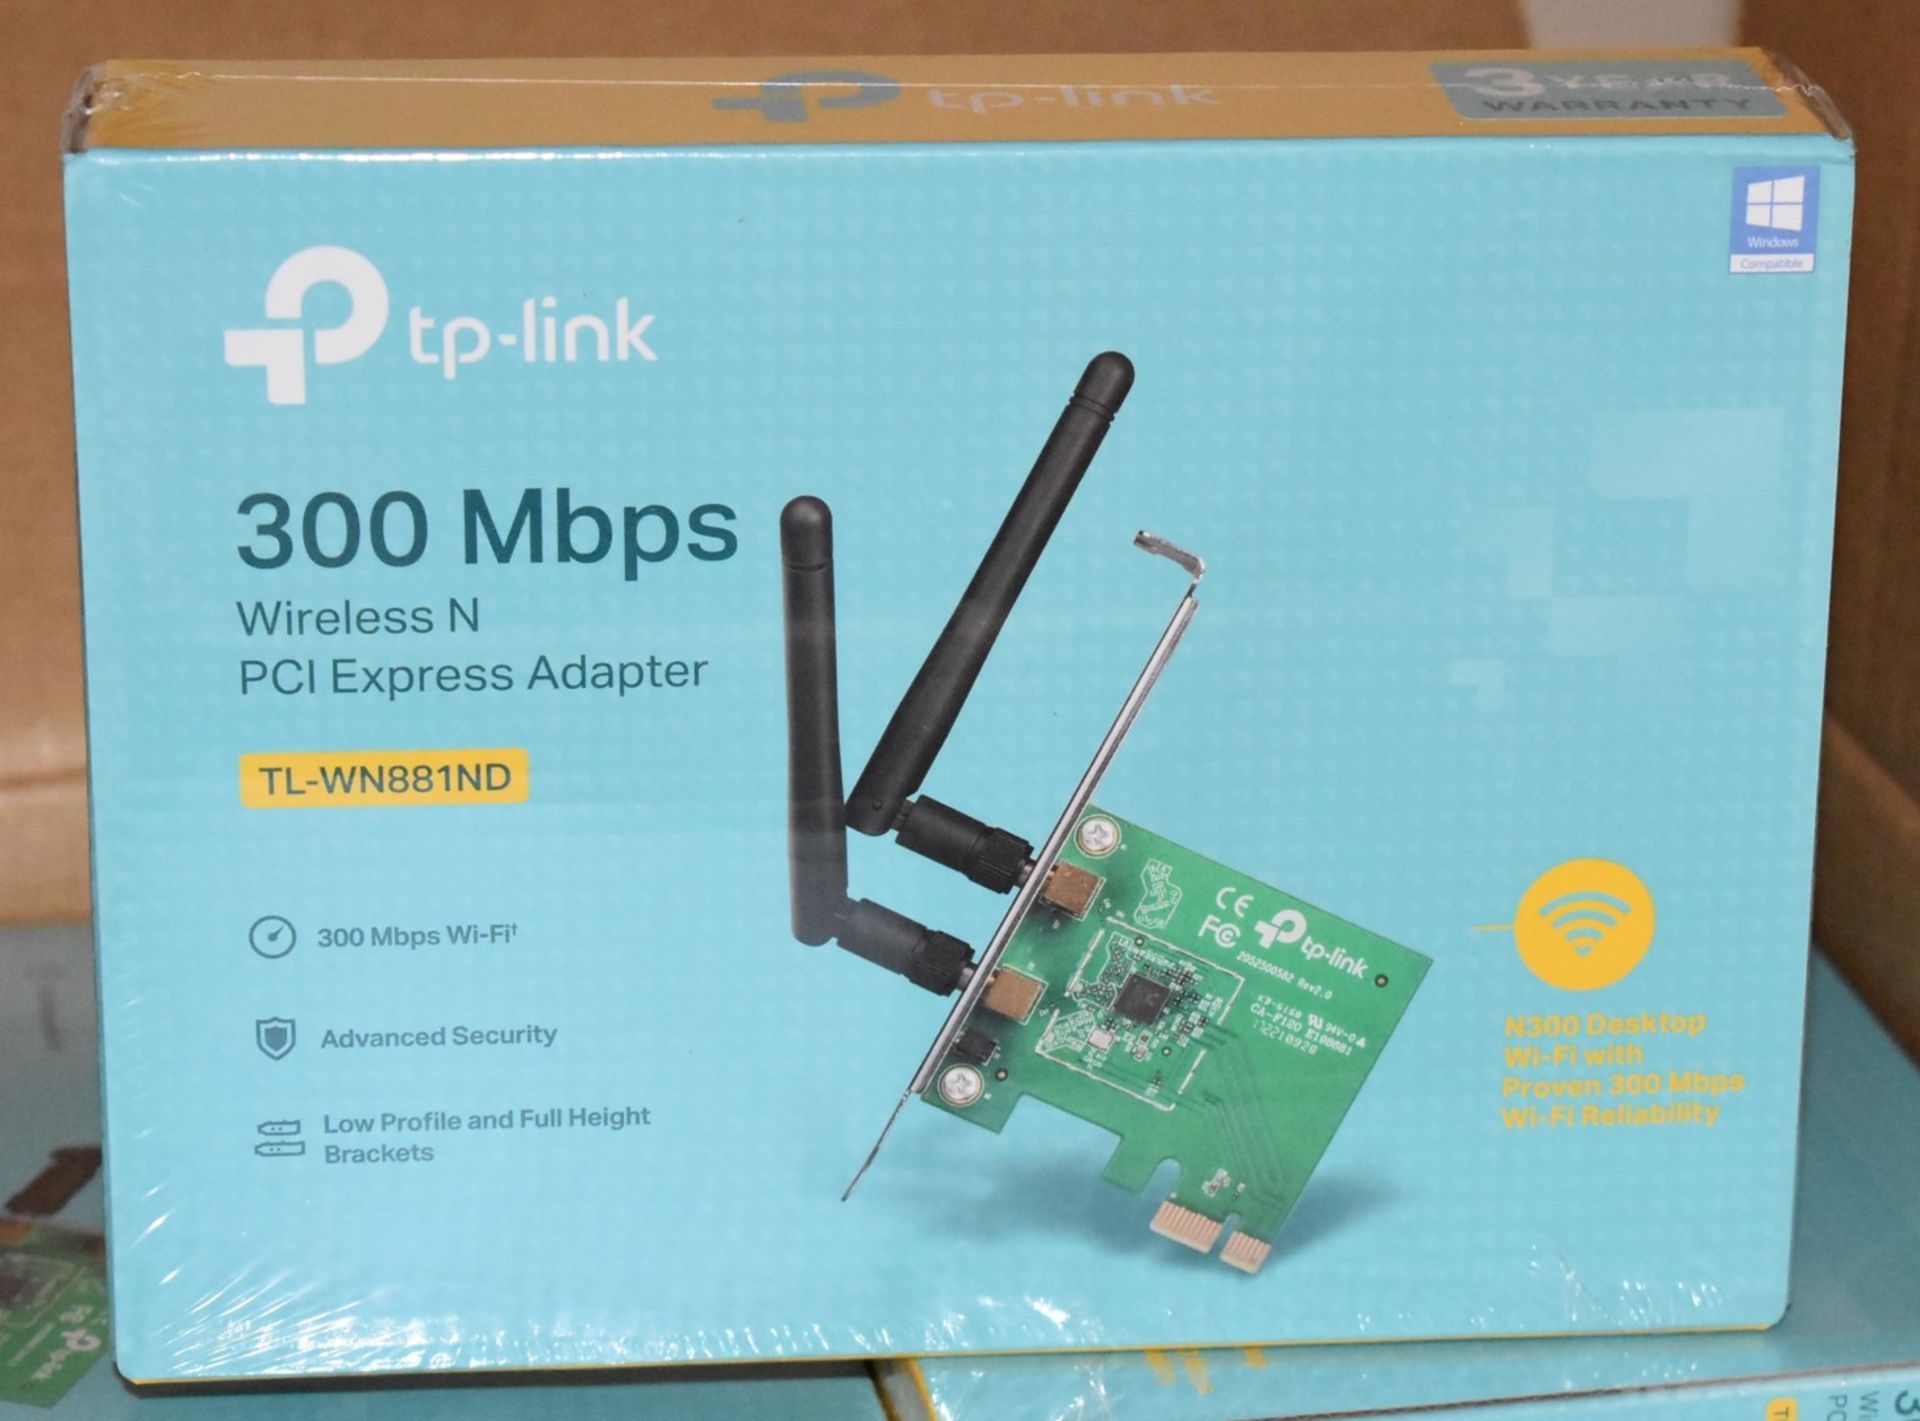 4 x TP Link 300Mbps Wireless N PCI Express Adapters - TL-WN881ND - New Sealed Stock - Image 4 of 6